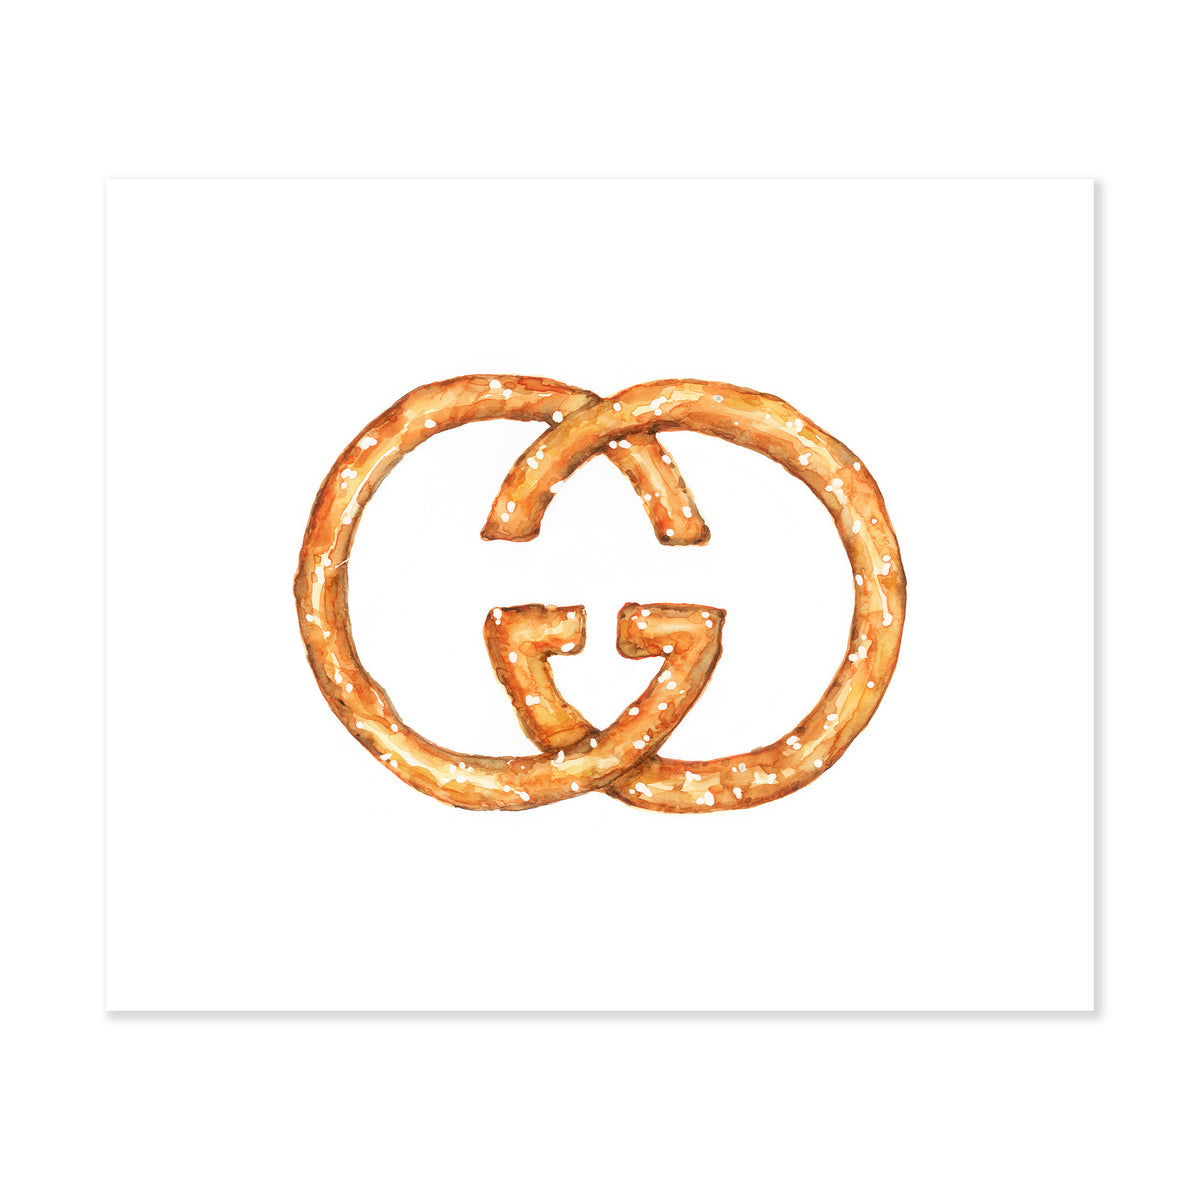 A fine art print featuring the Gucci emblem GG made of pretzel painted with watercolors on a soft white background